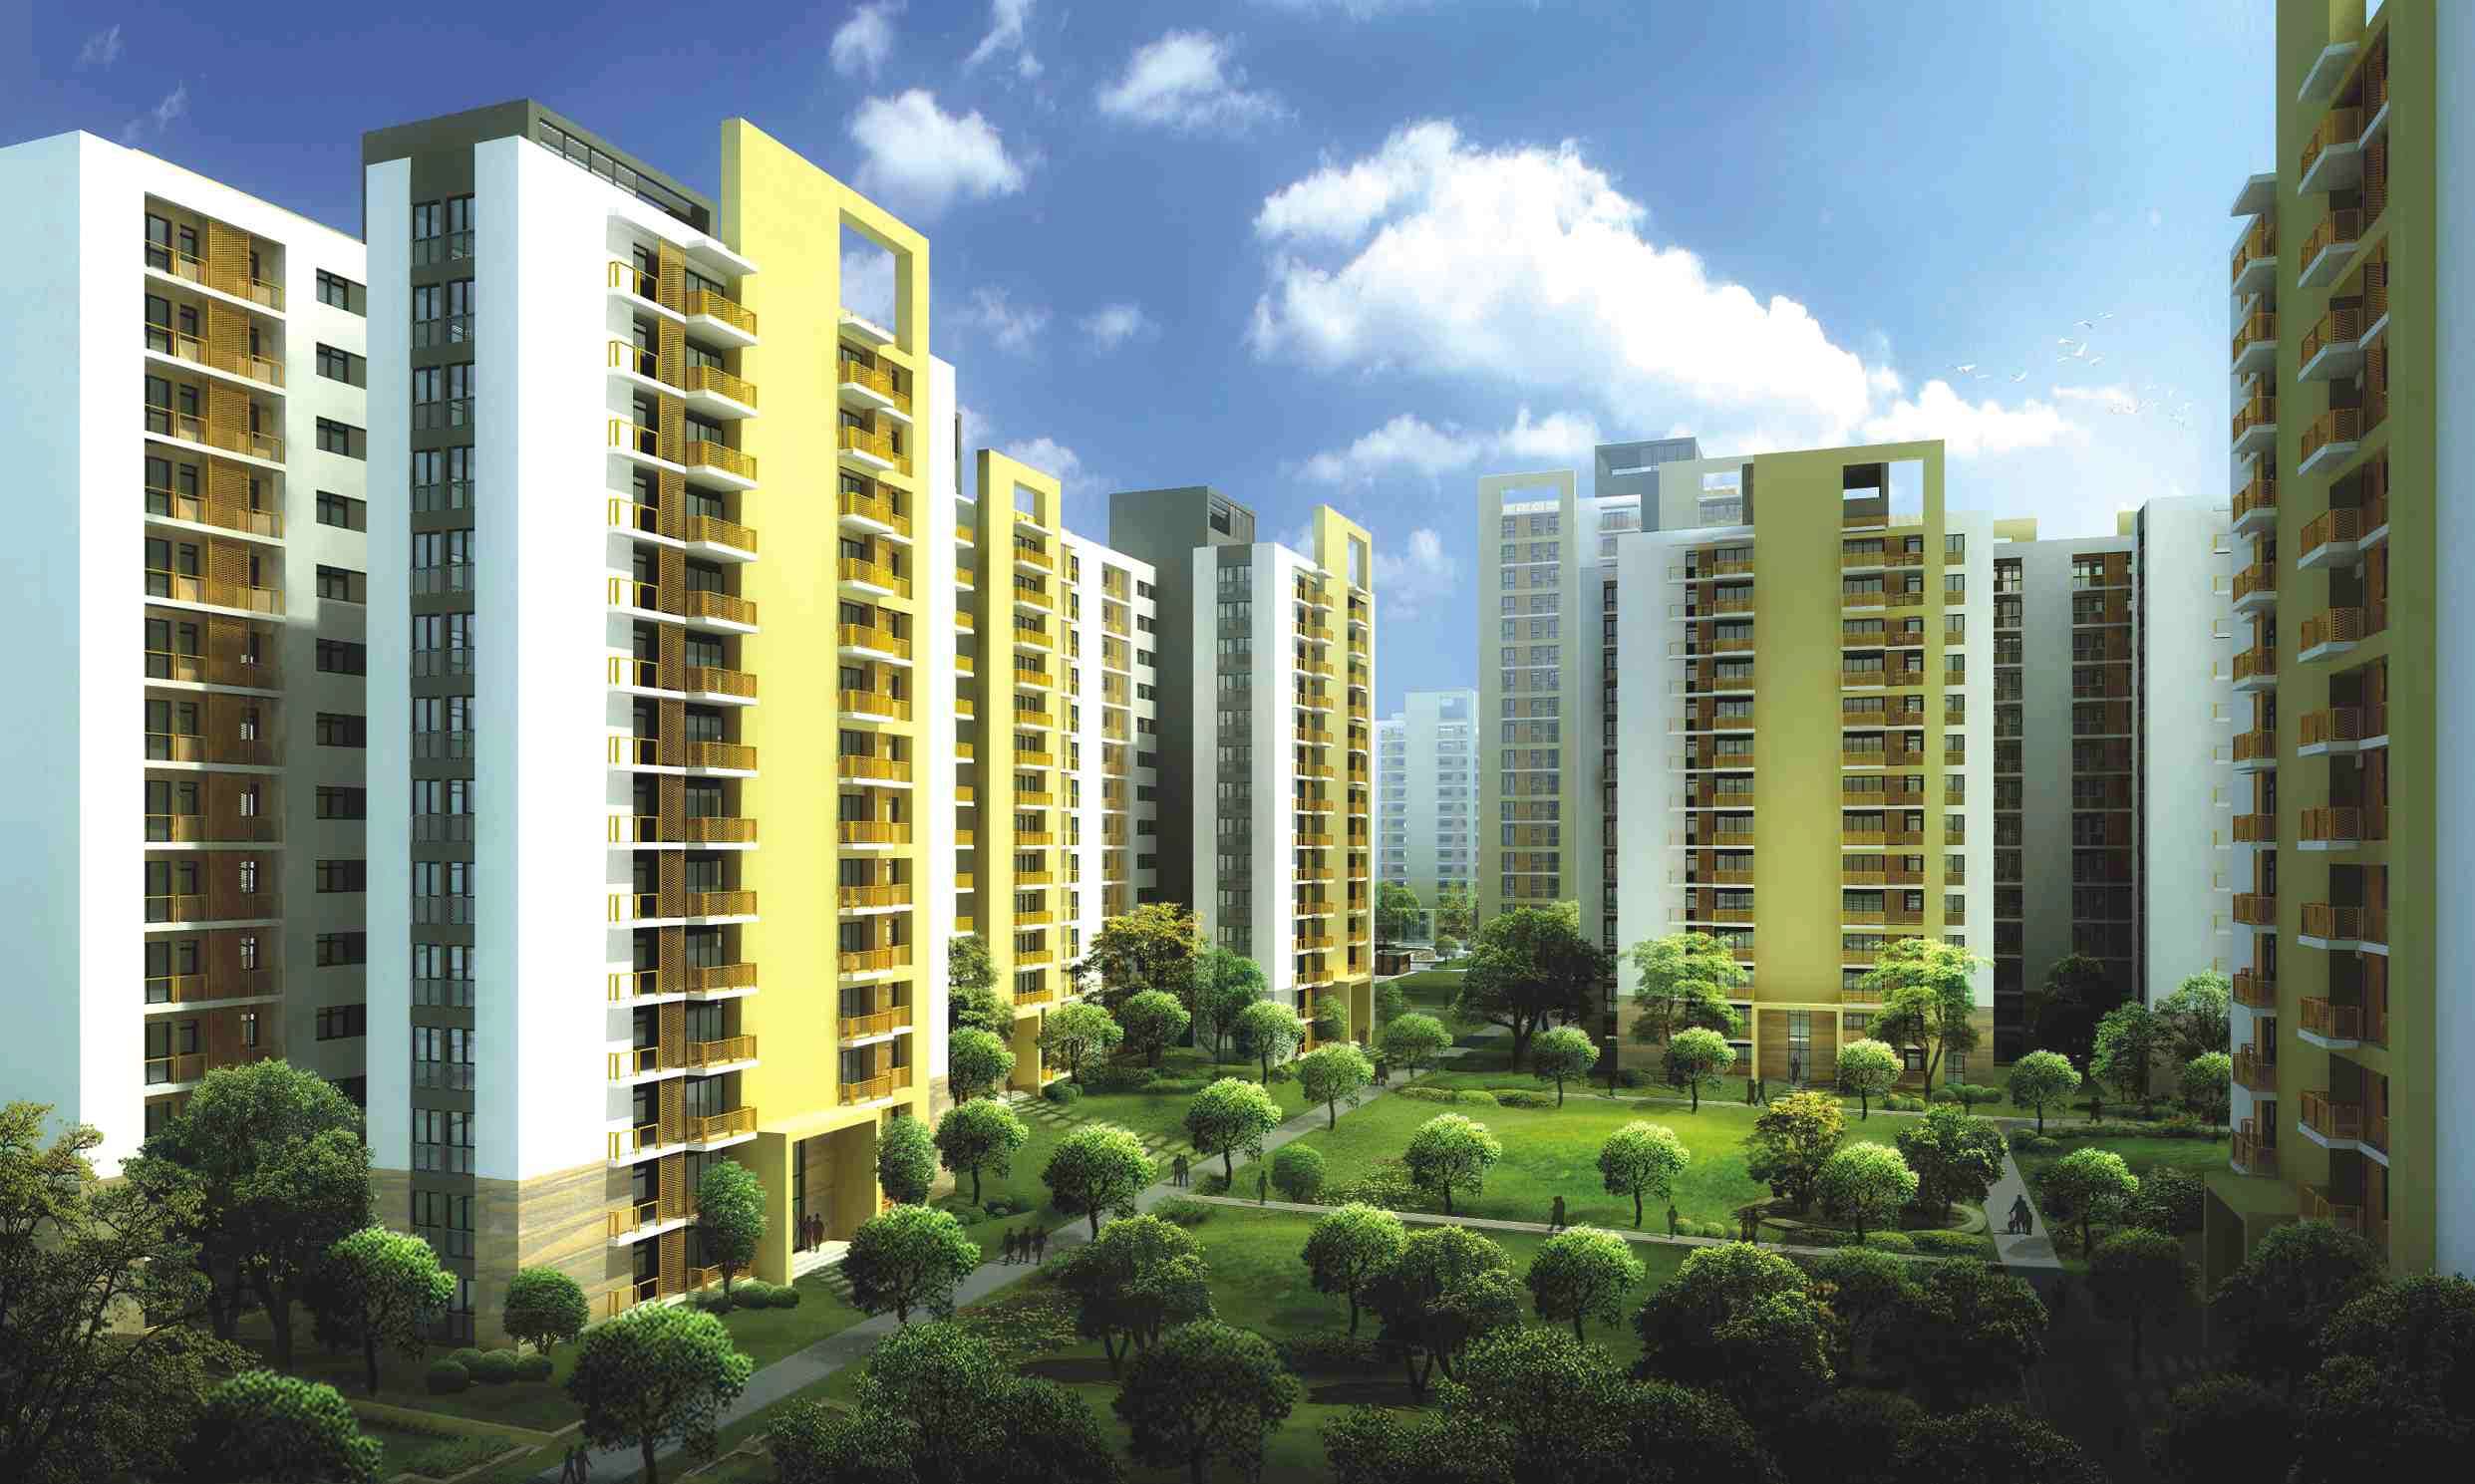 Gurgaon offering You the best Residential Properties